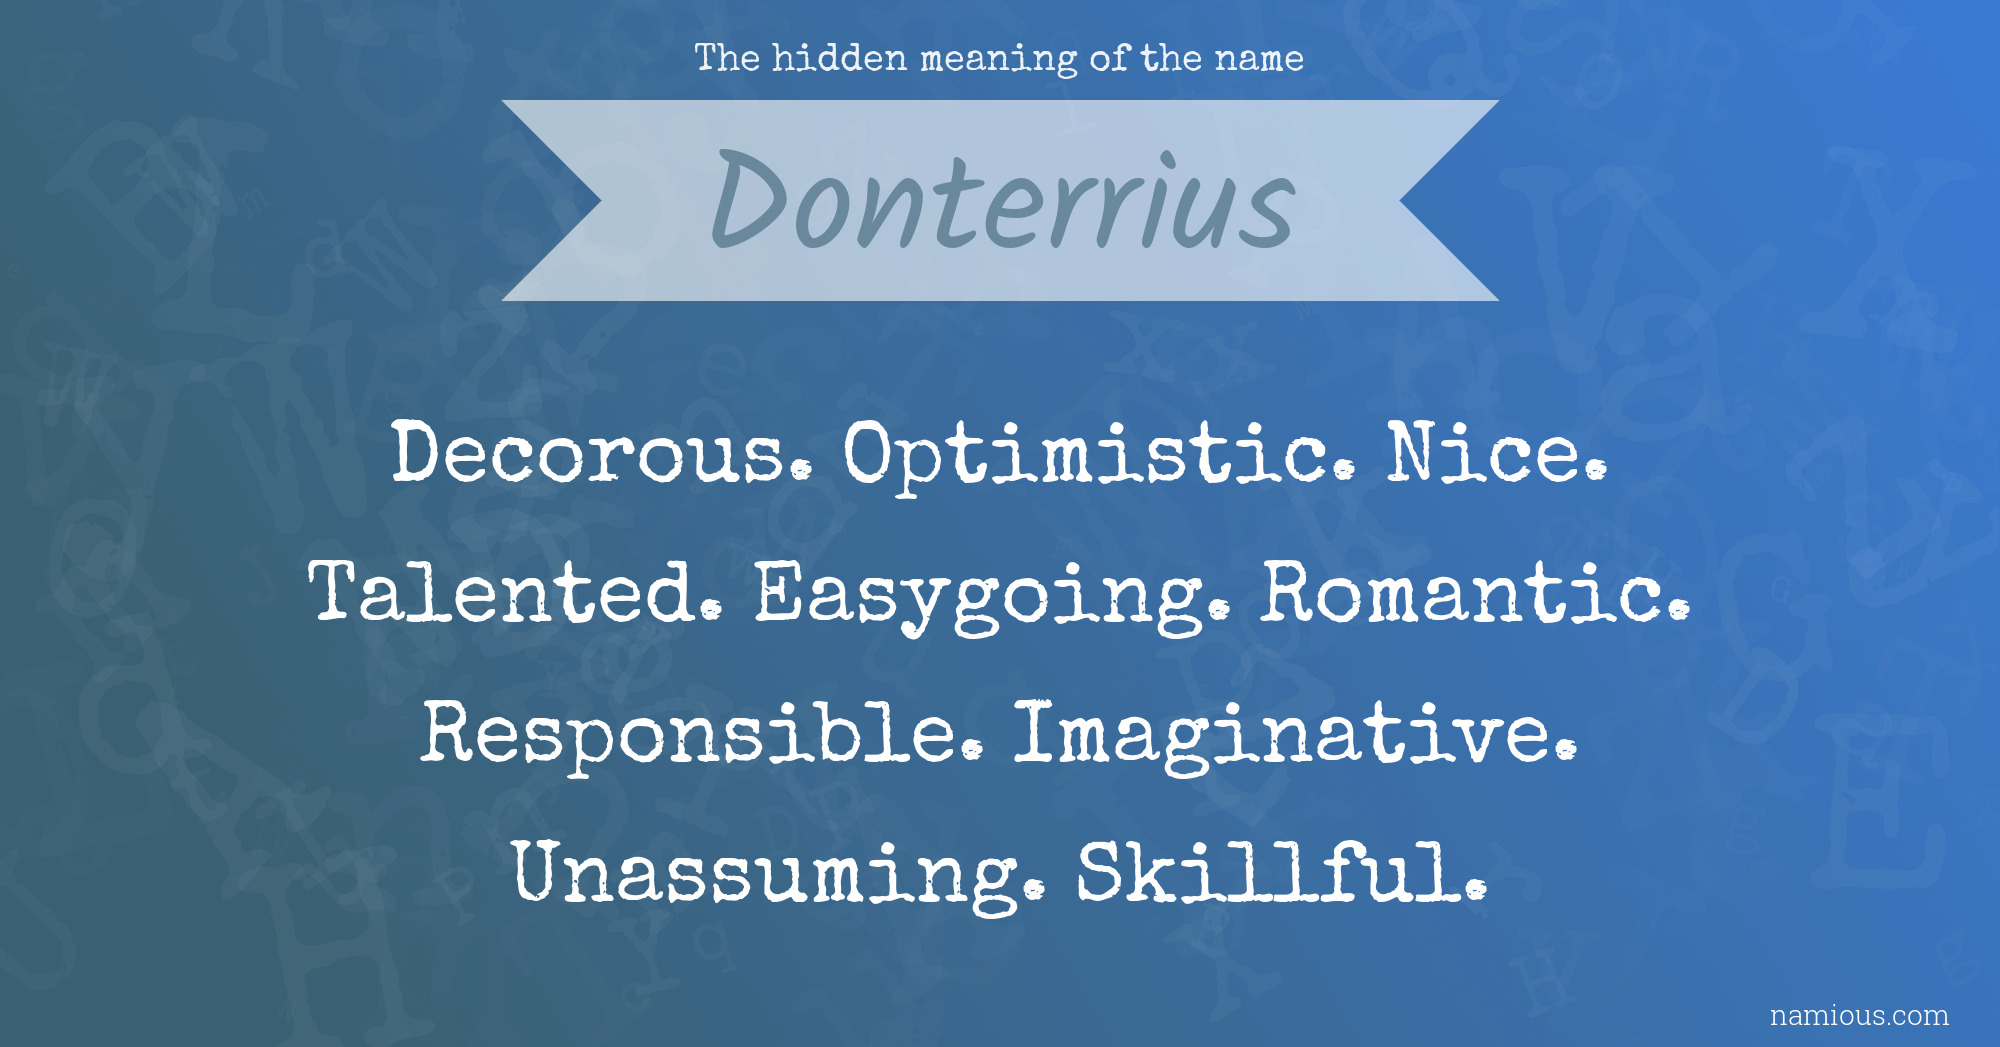 The hidden meaning of the name Donterrius